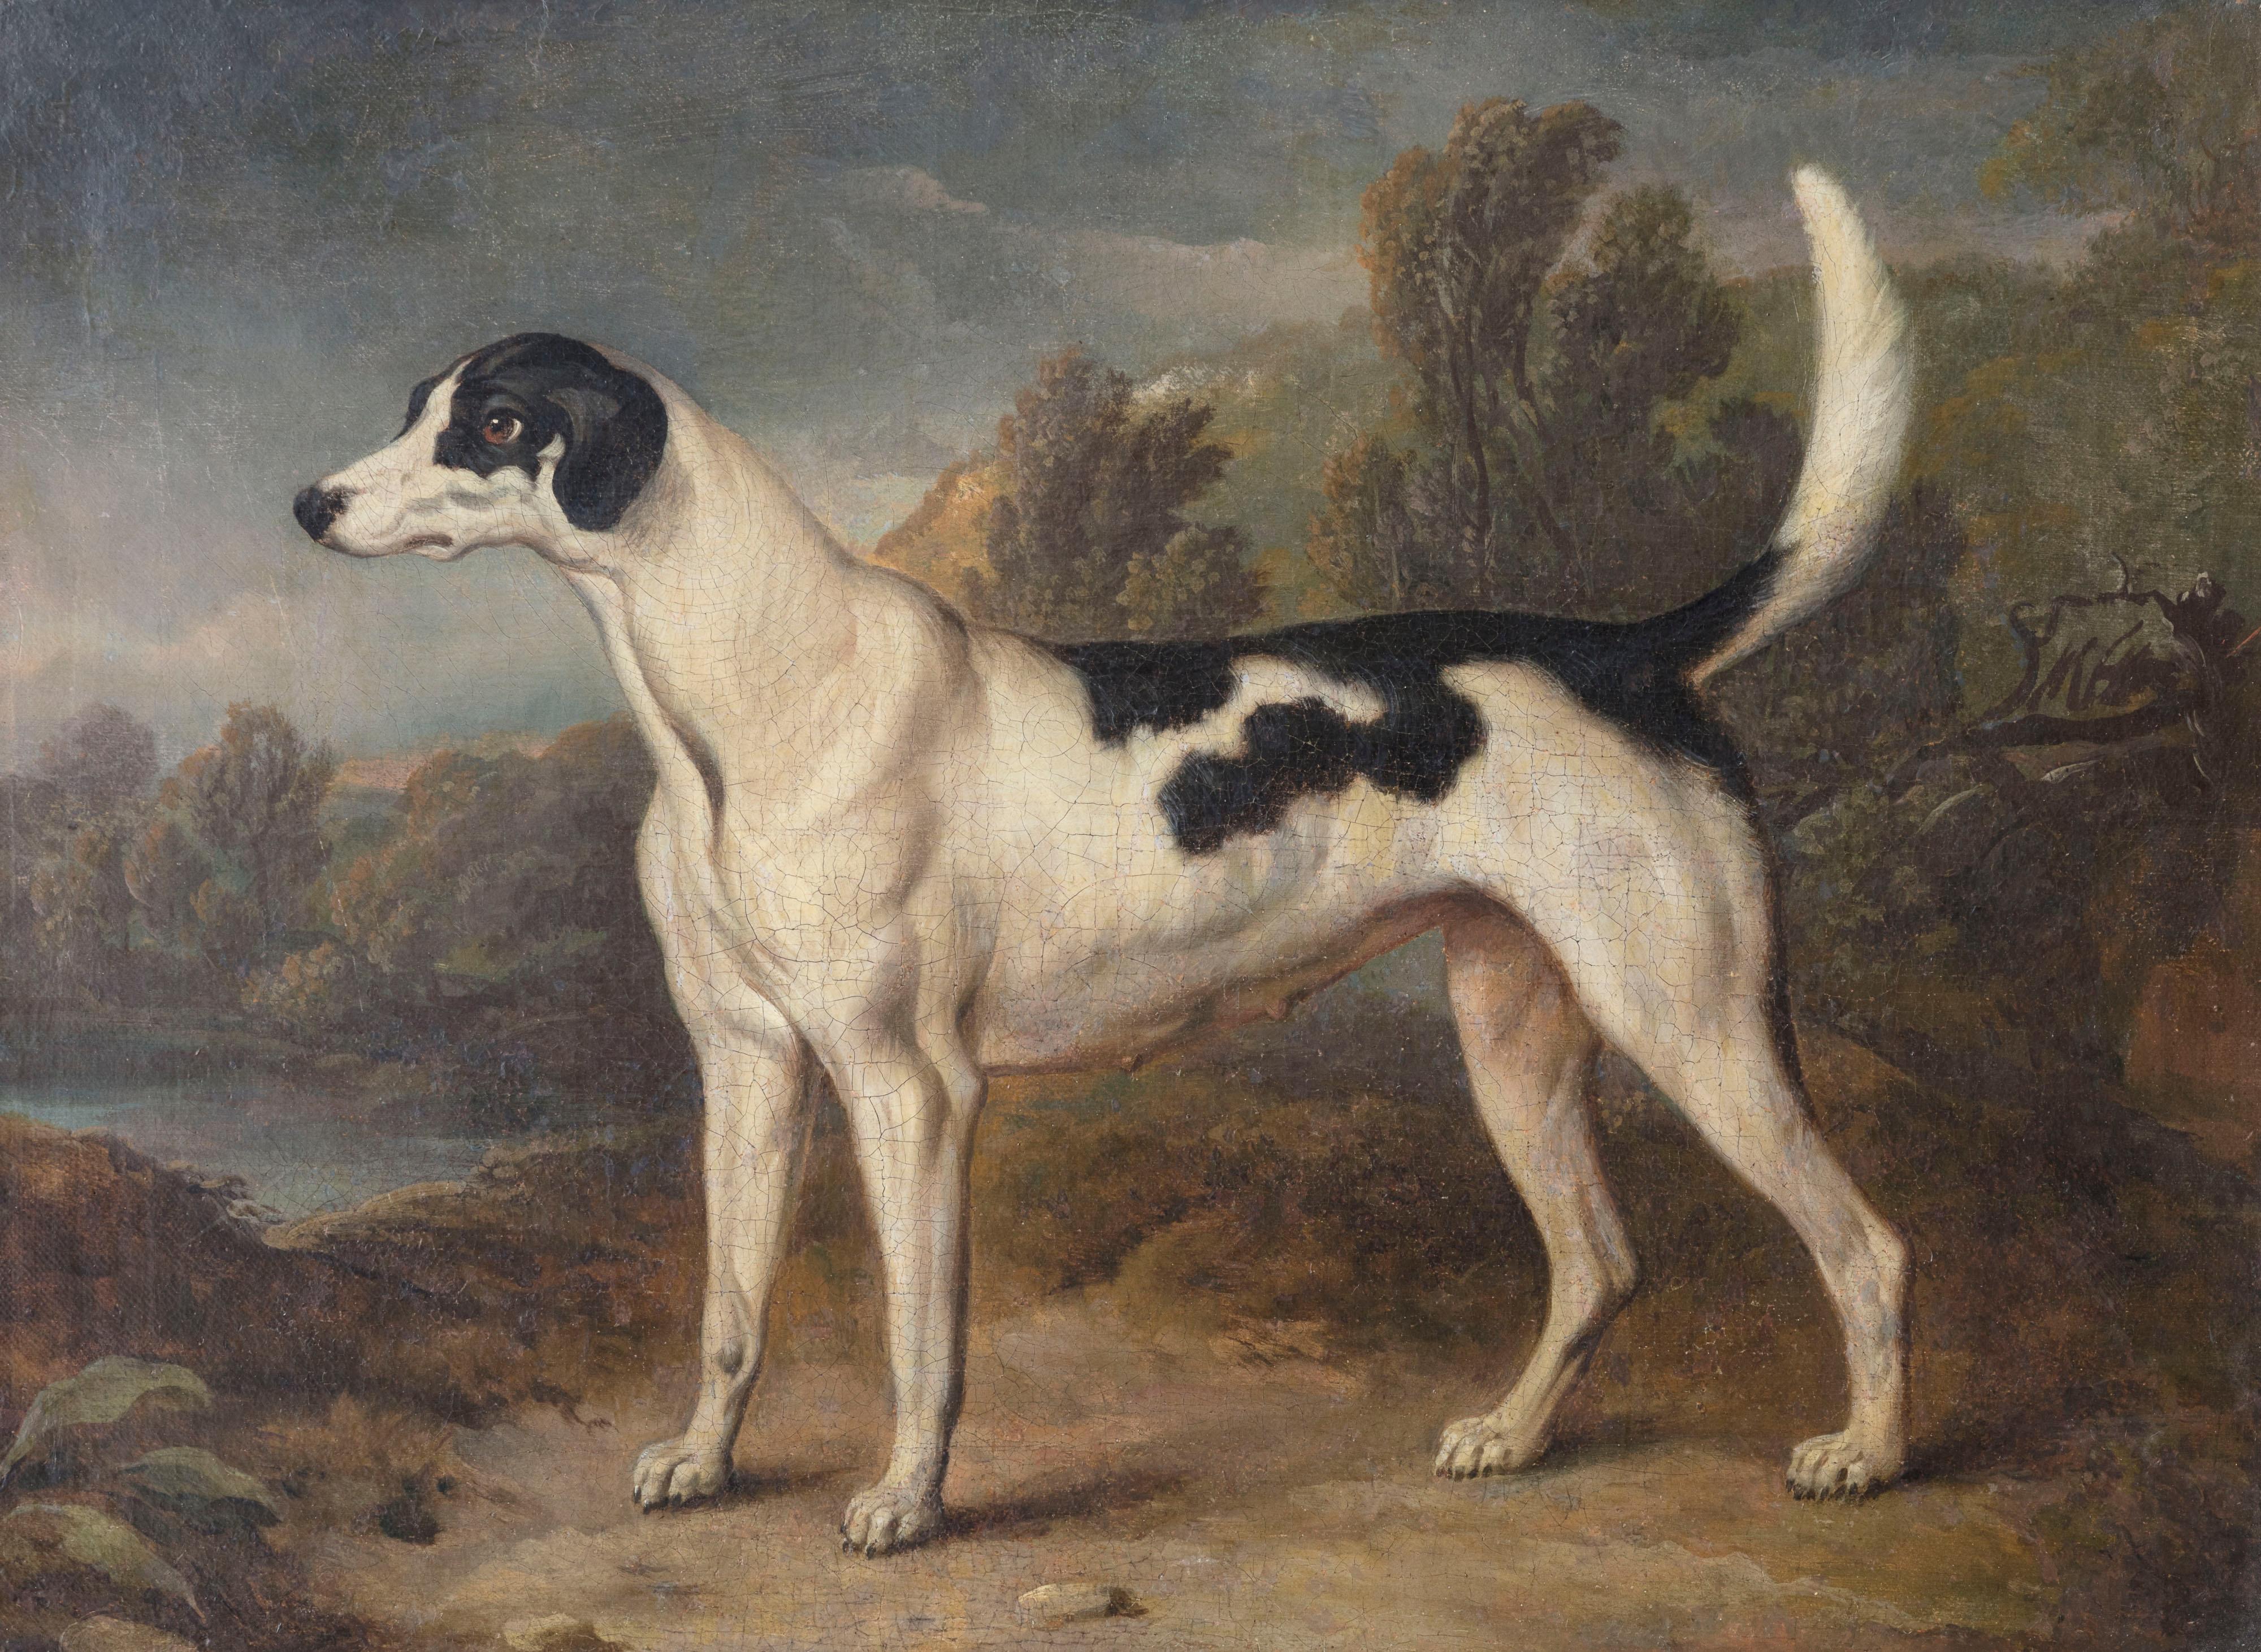 Oil on canvas. English, late 18th-early 19th century.